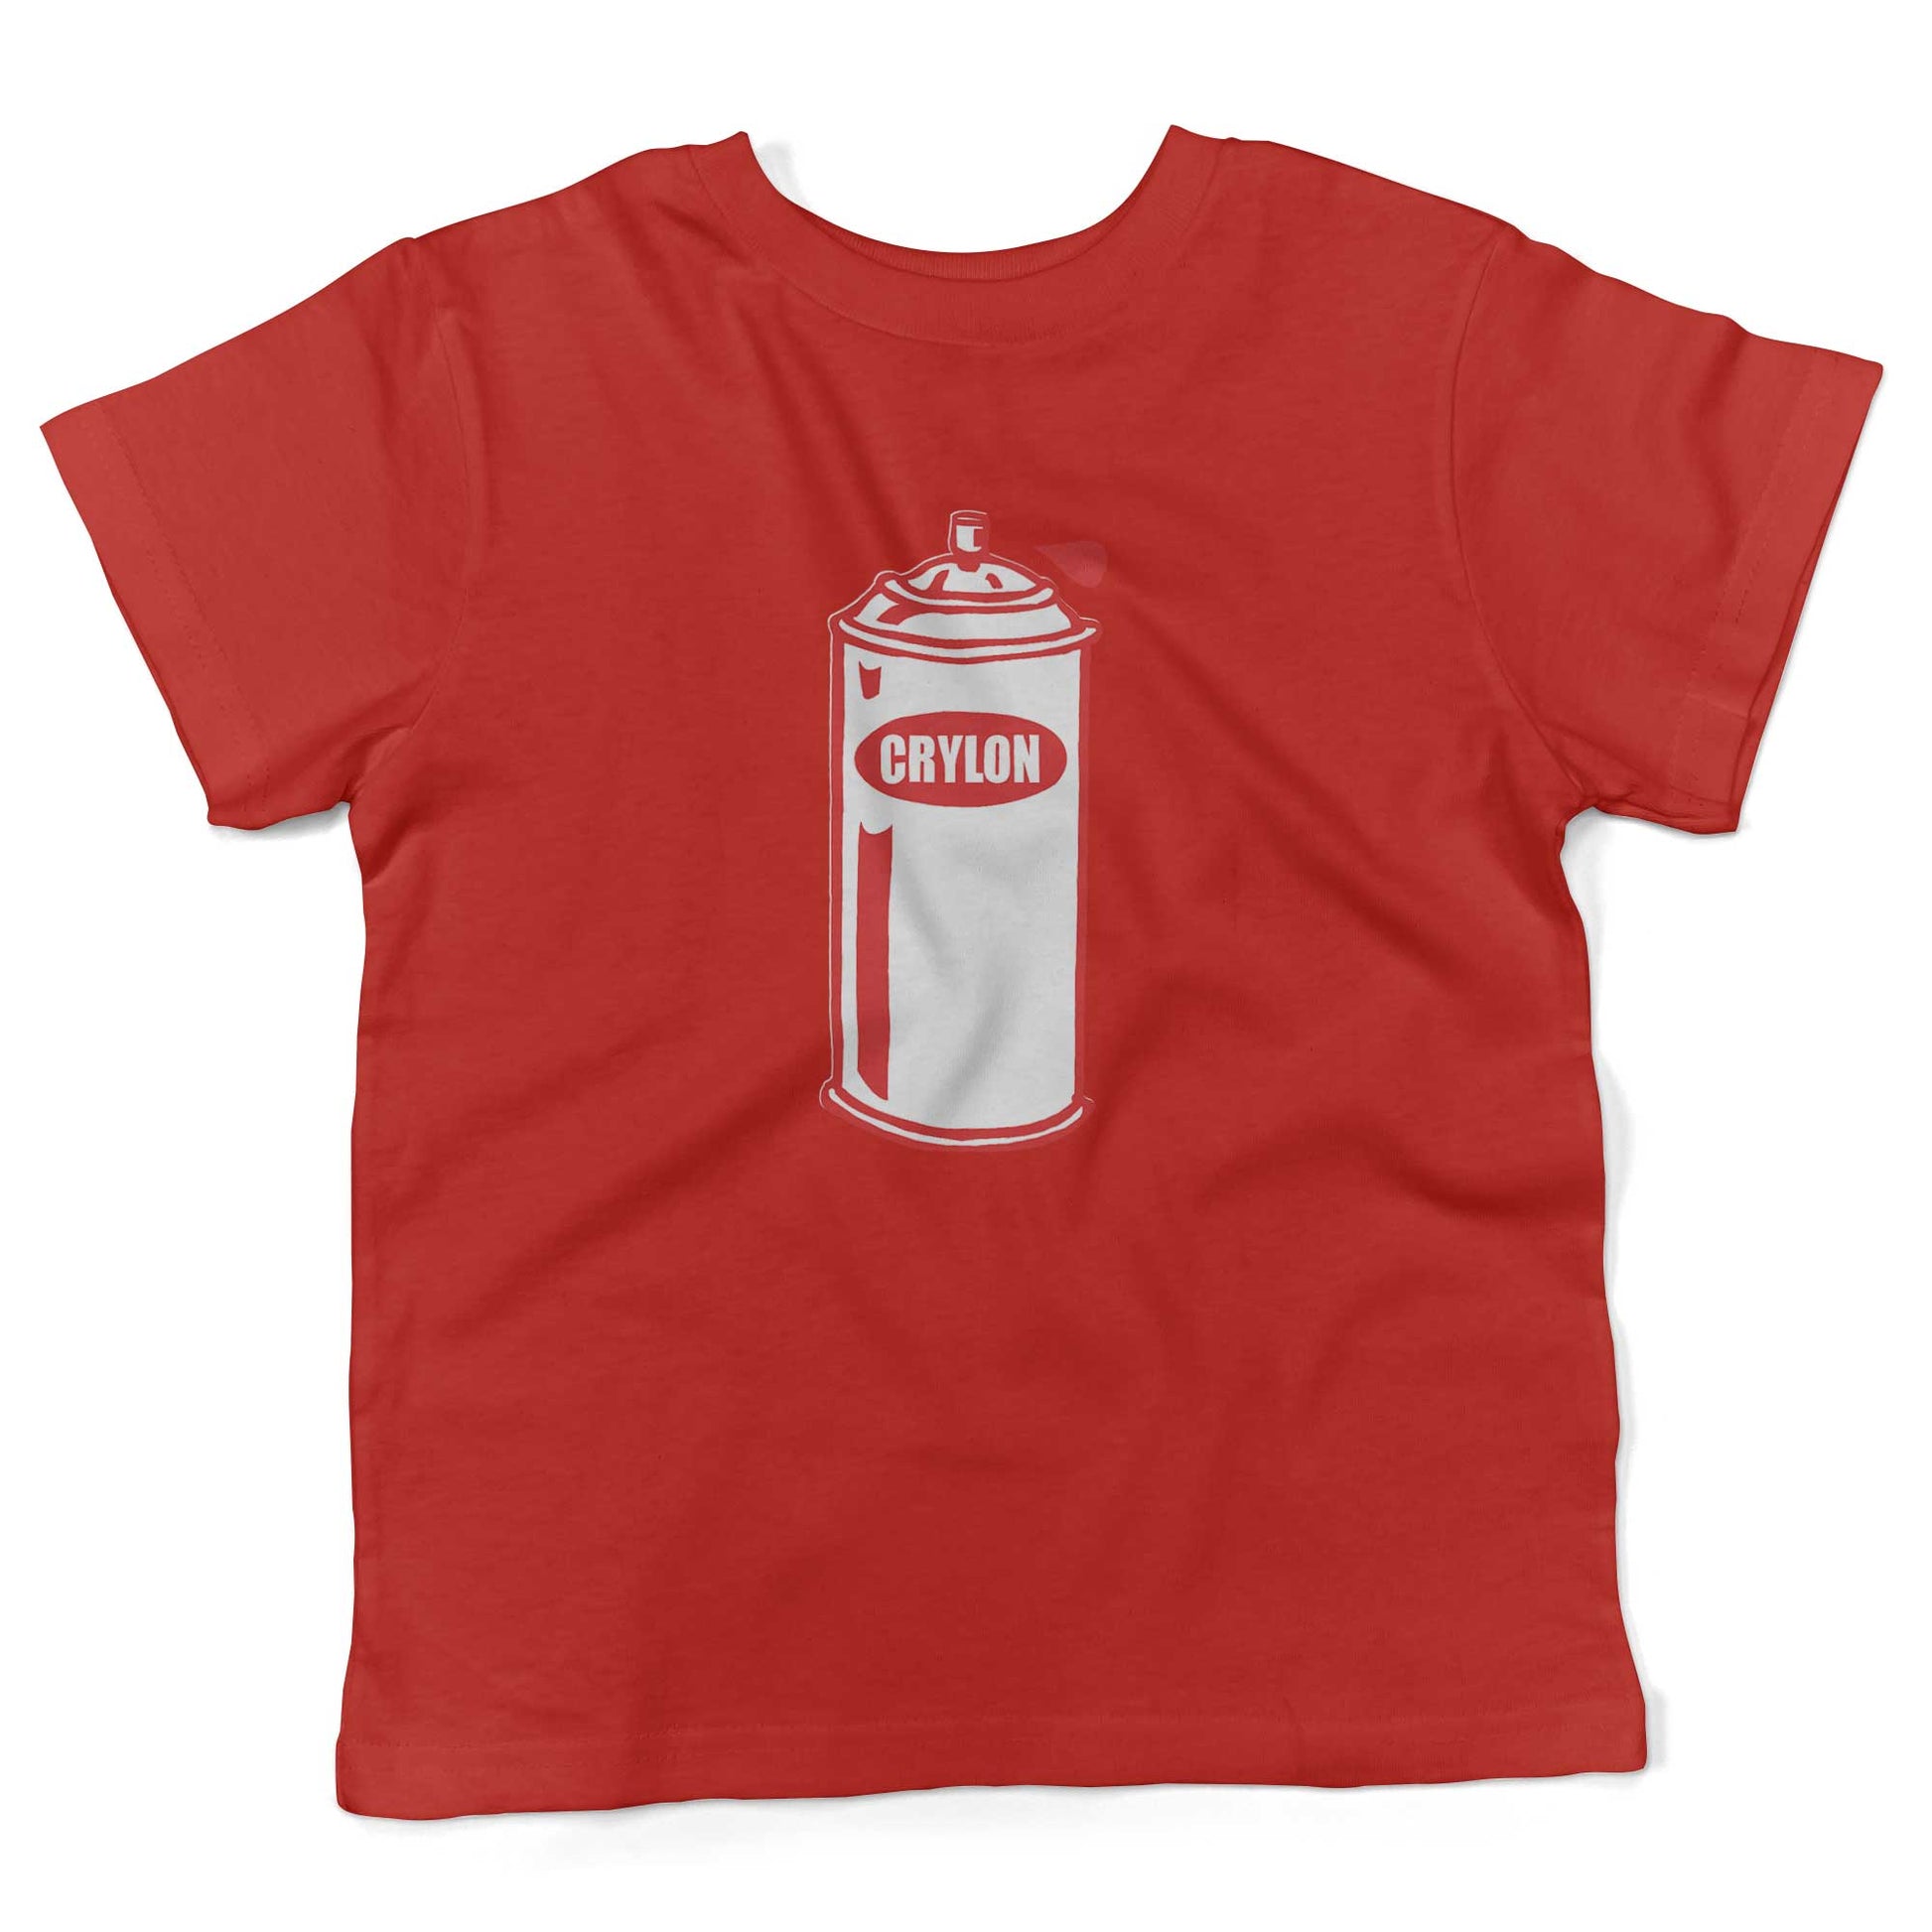 Crylon Cans Toddler Shirt-Red-2T